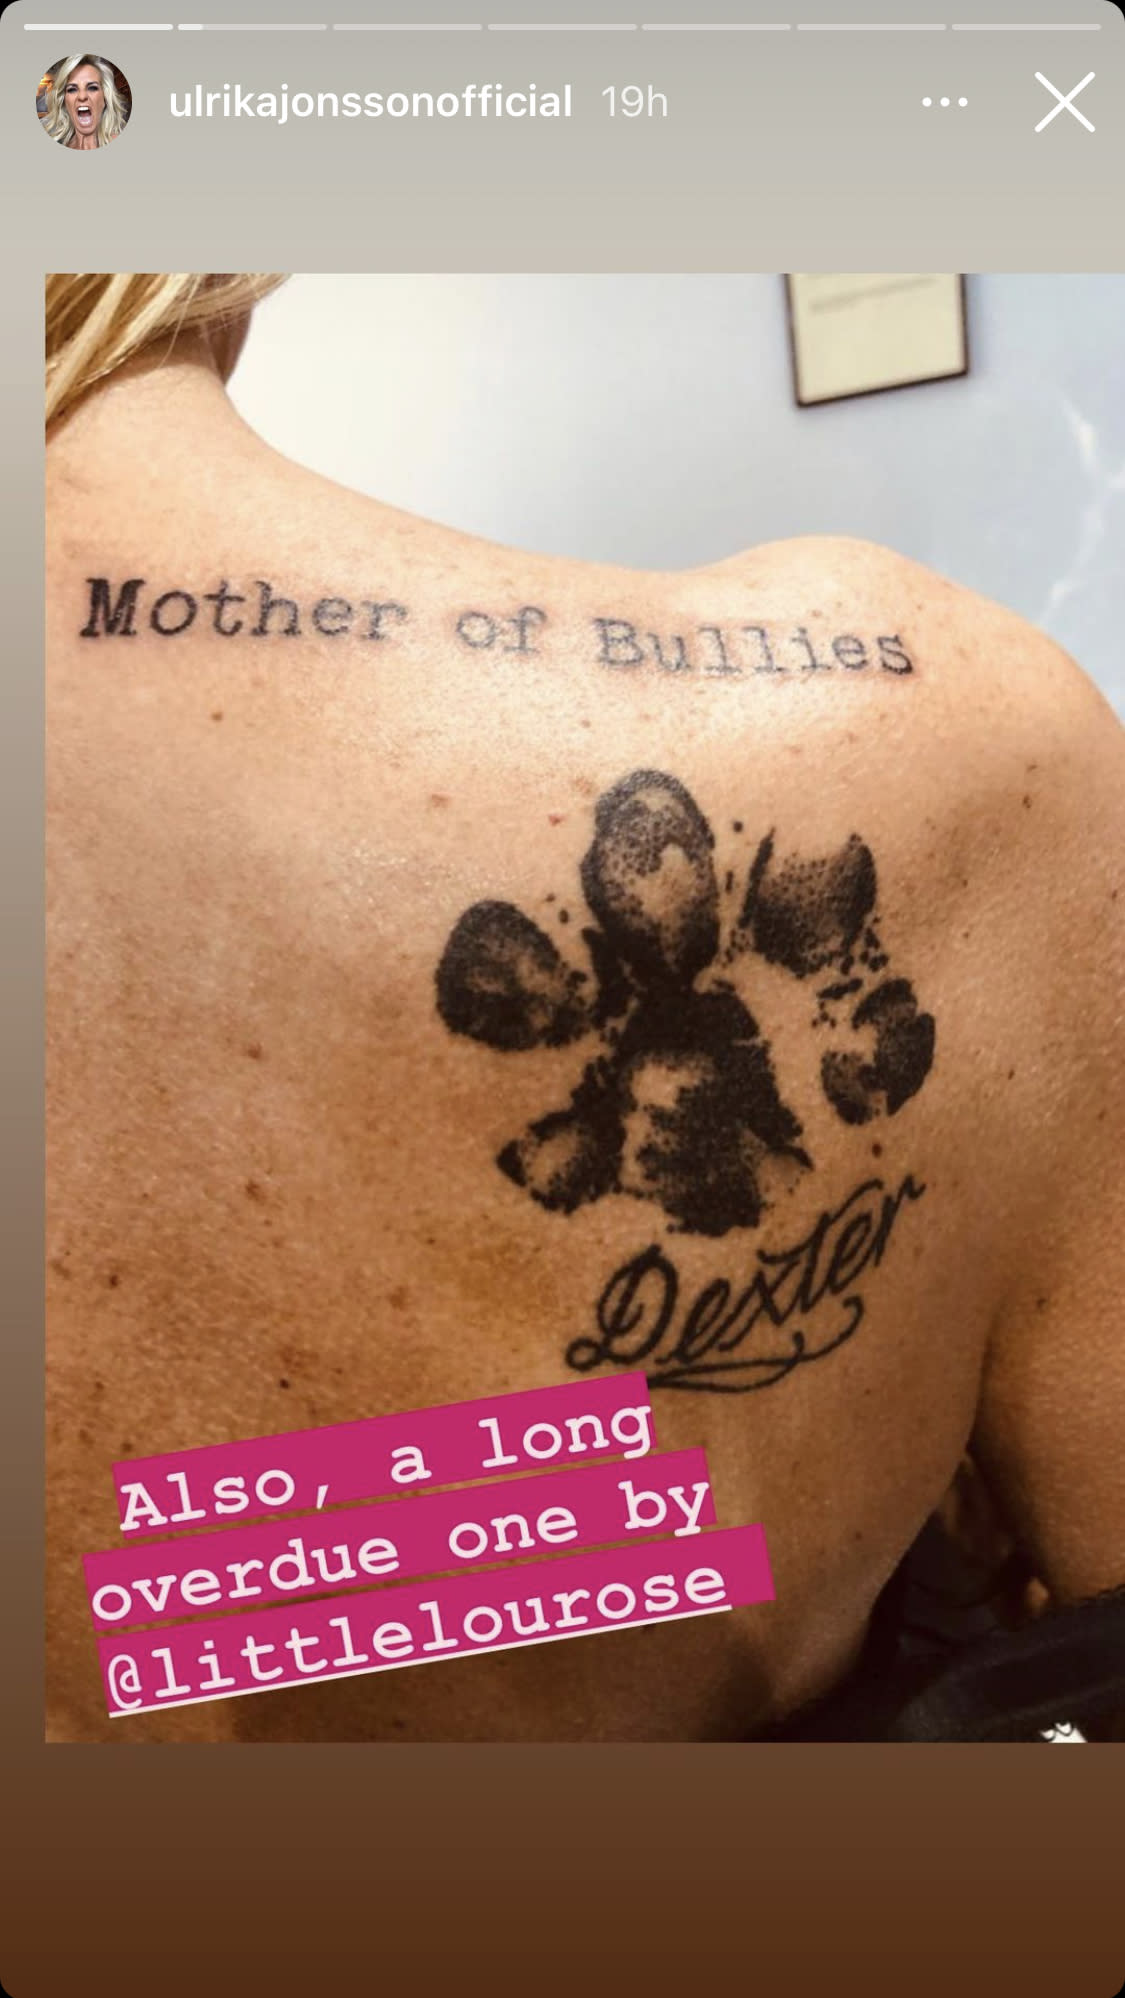 Ulrika Jonsson reveals two huge dog tribute tattoos and a new piercing on her Instagram story.